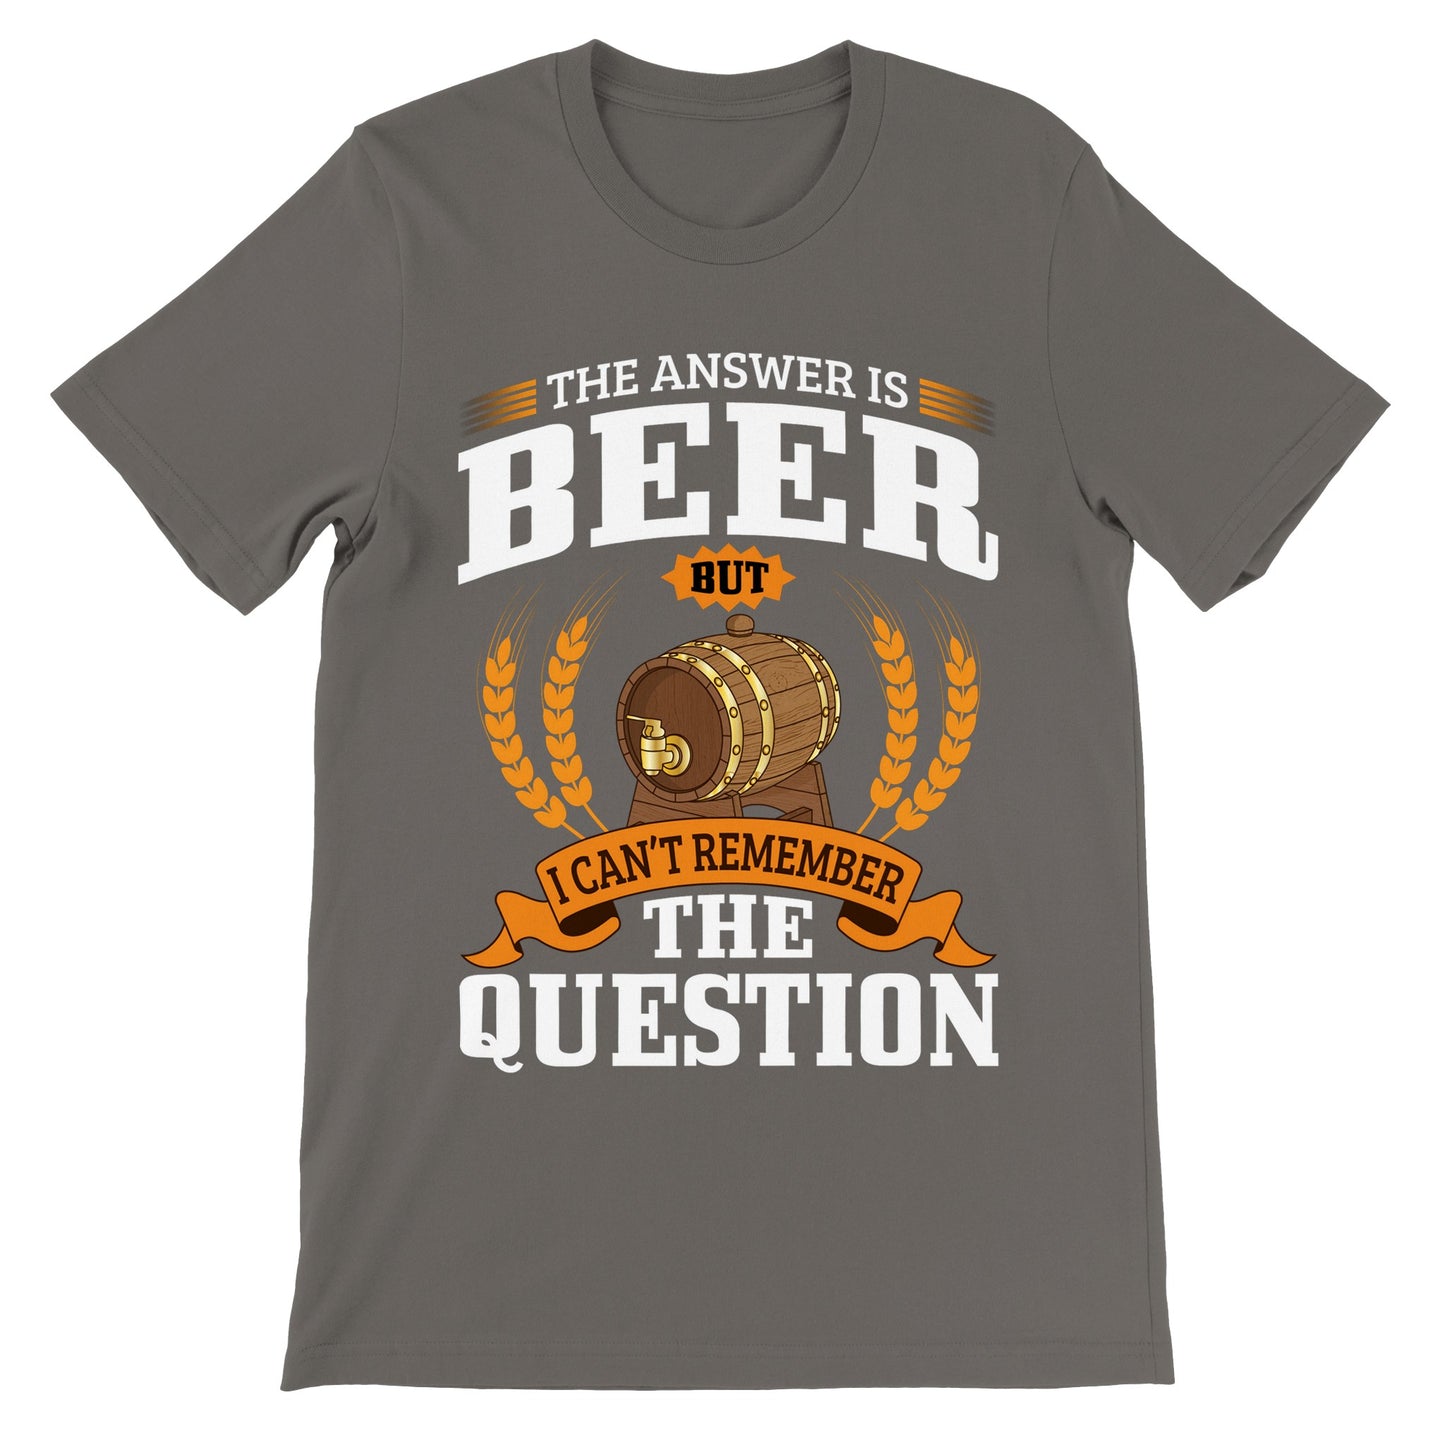 Sjove T-shirts - The Answer is Beer But - Premium Unisex T-shirt